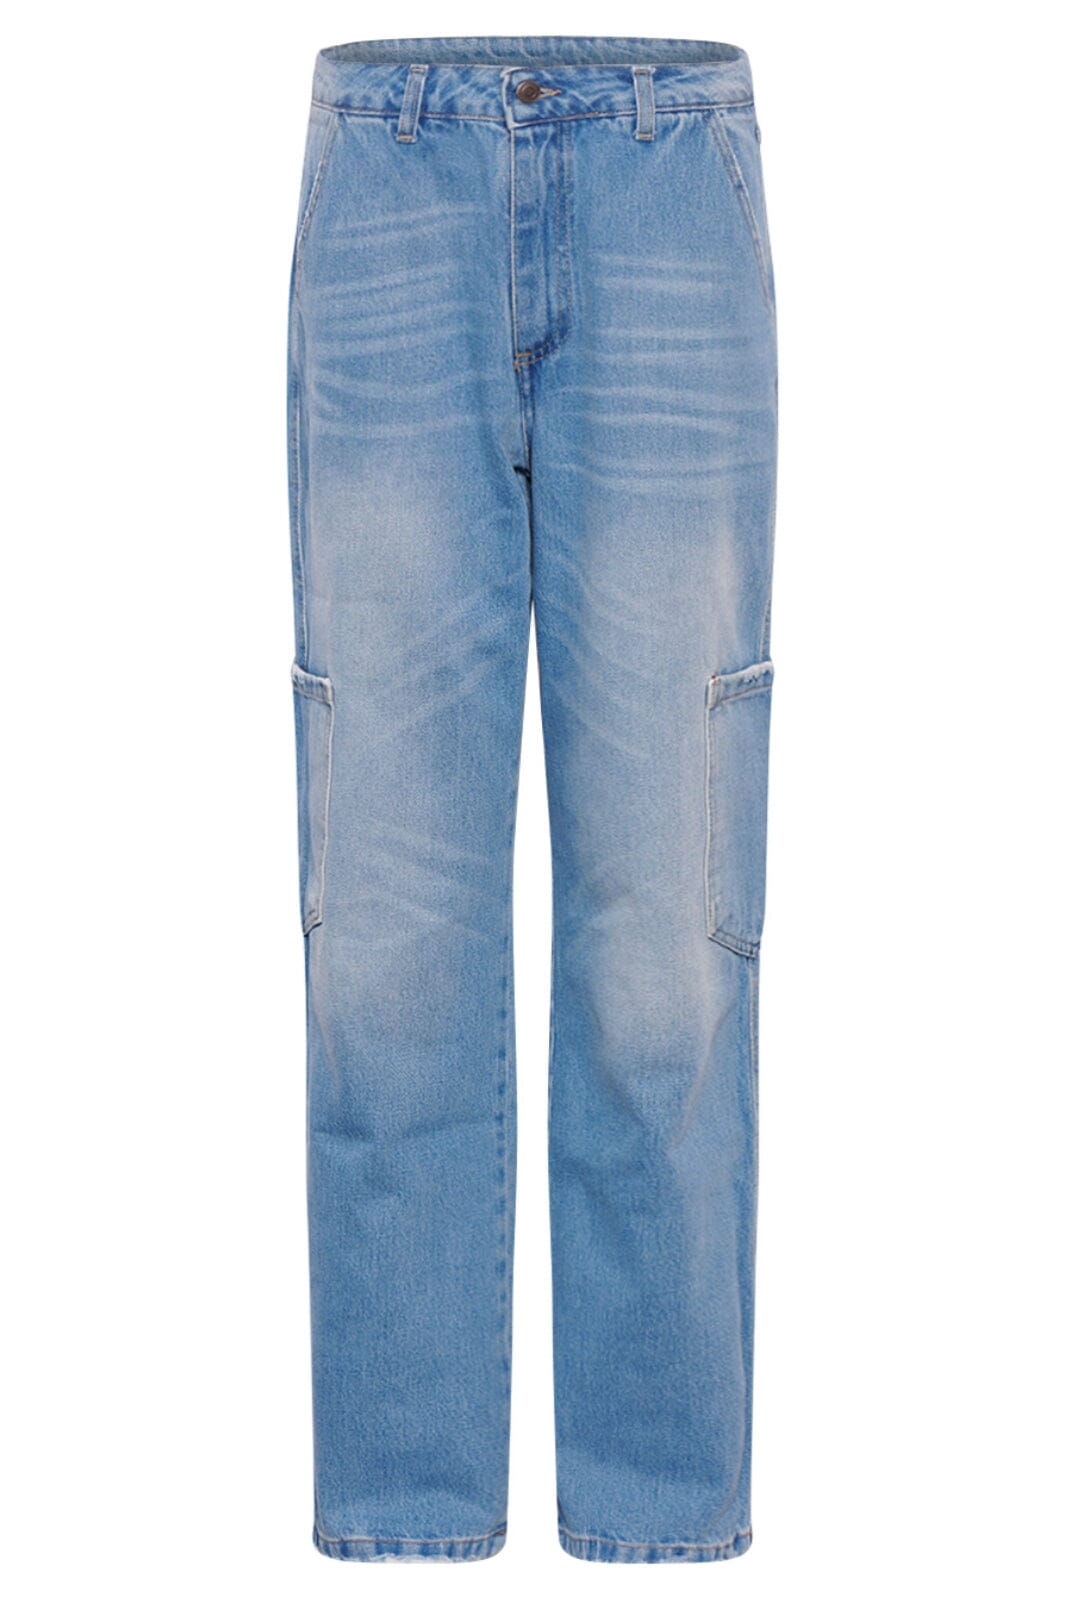 Noella - Rory Cargo Jeans - Light Blue Washed Jeans 